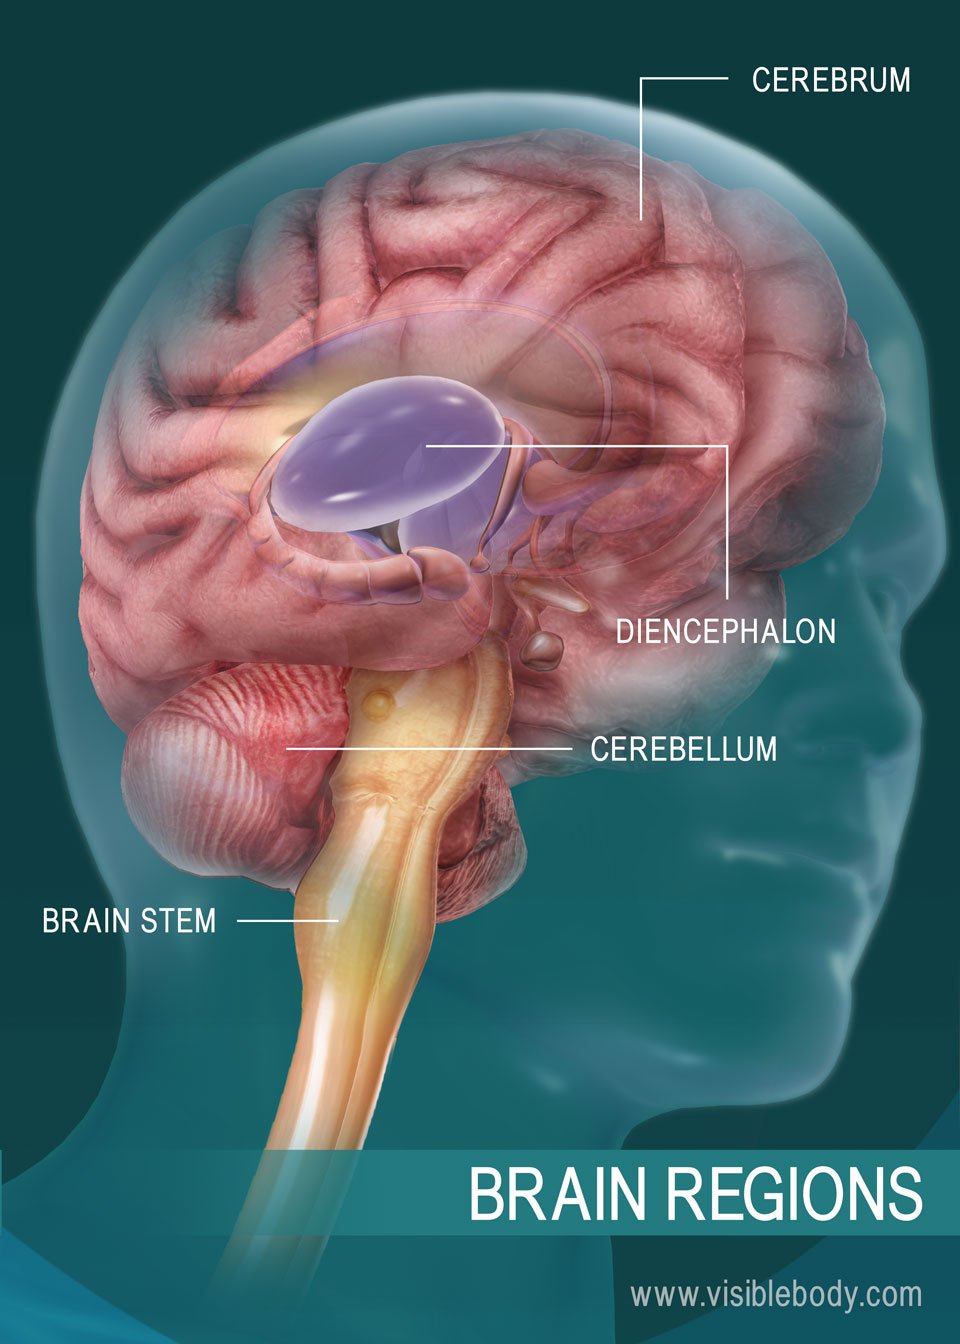 A diagram of regions of the brain